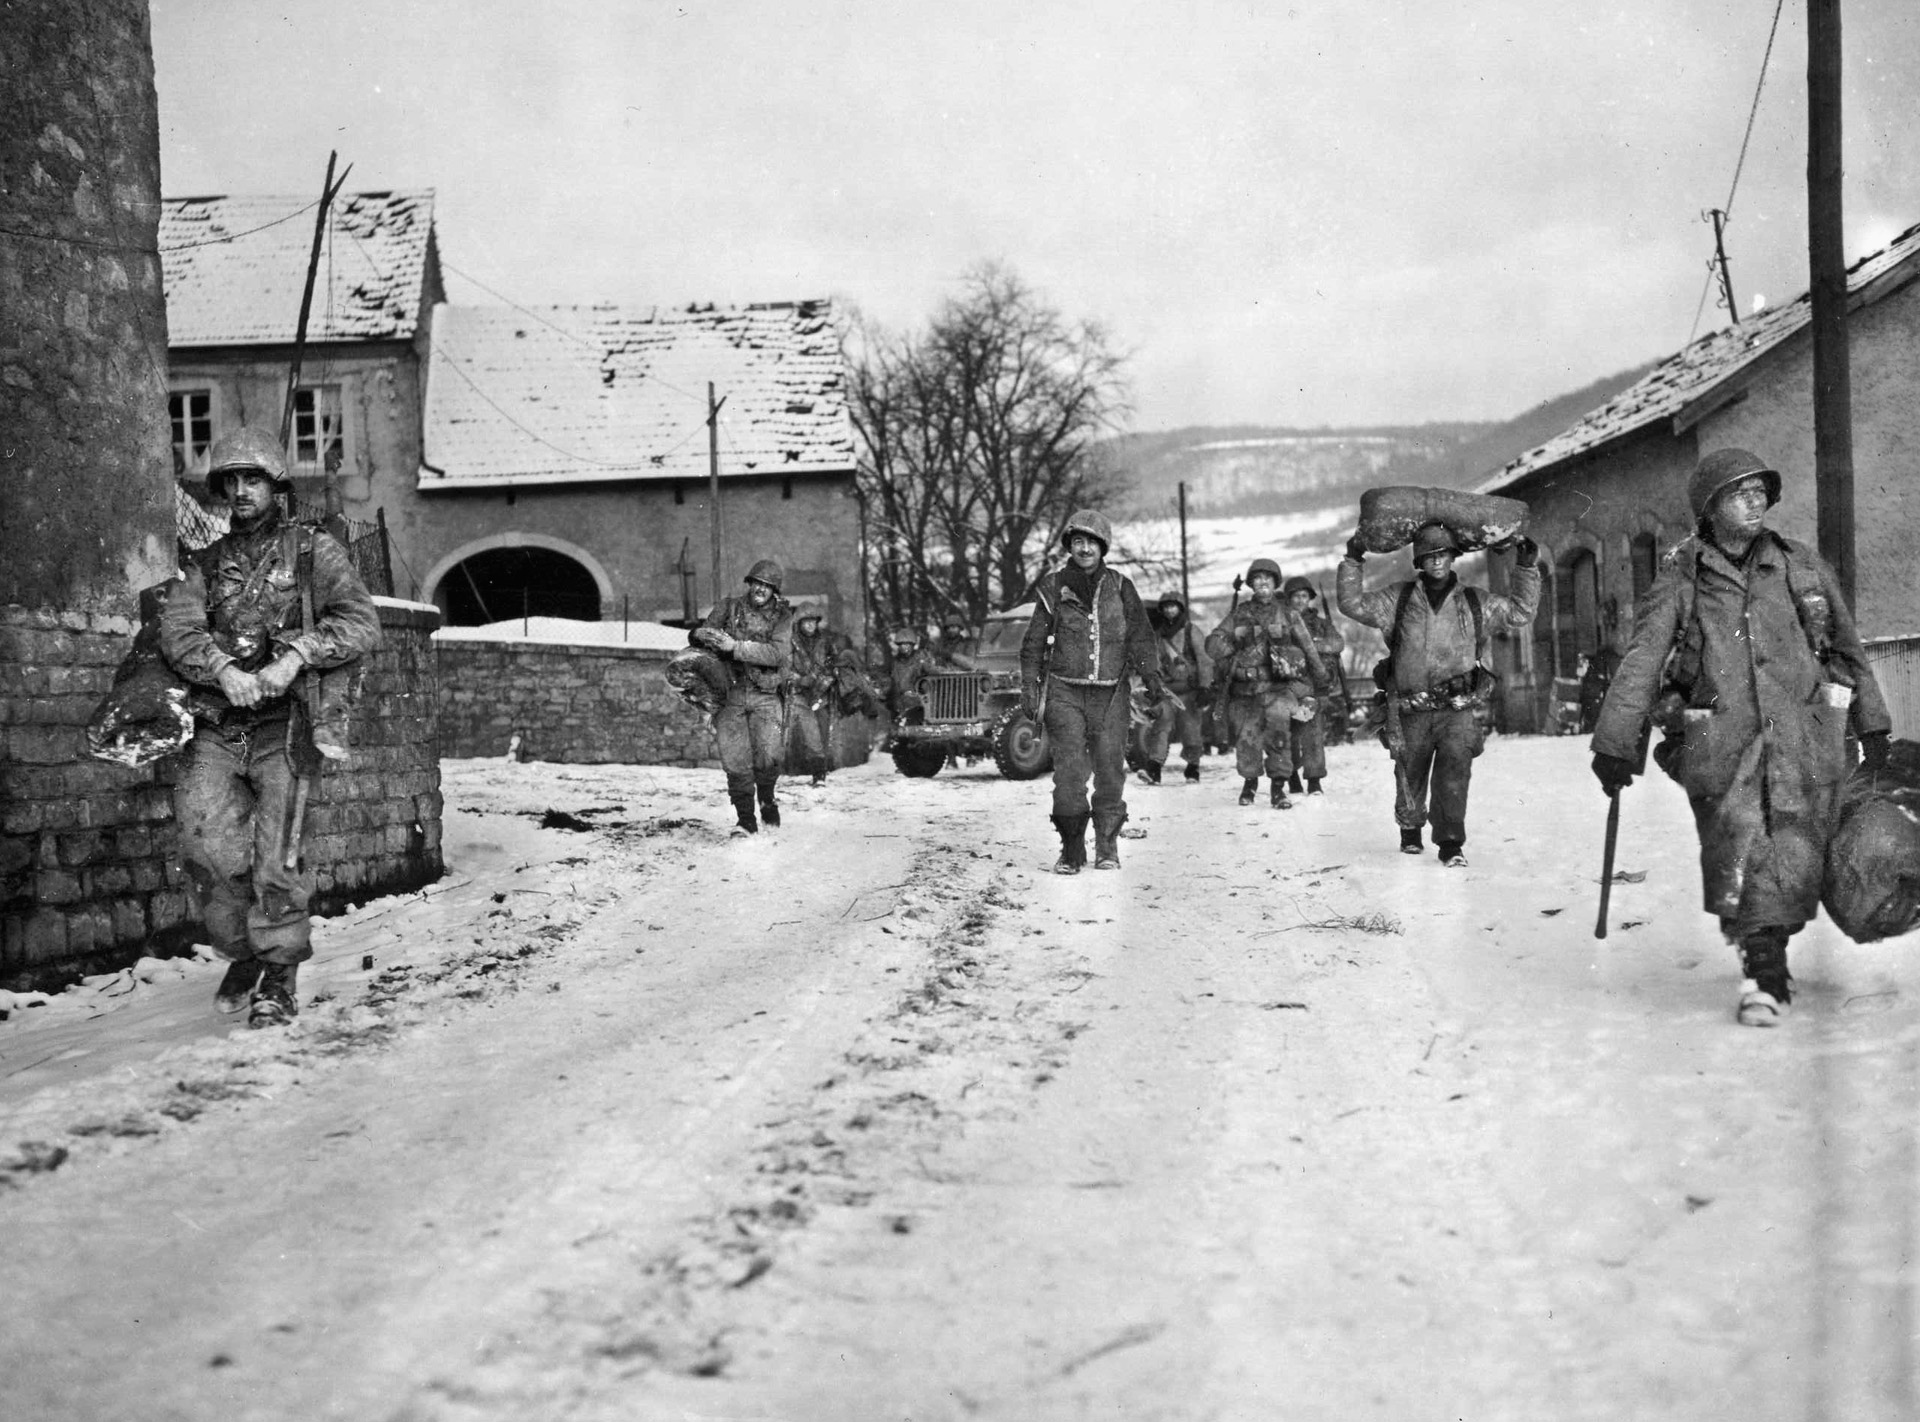 After the German counteroffensive had been halted, soldiers of the 8th Infantry Regiment, 4th Infantry Division, move through the snow-covered Luxembourg town of Moesdorf, January 21, 1945. Much hard fighting took place in small villages such as this one.